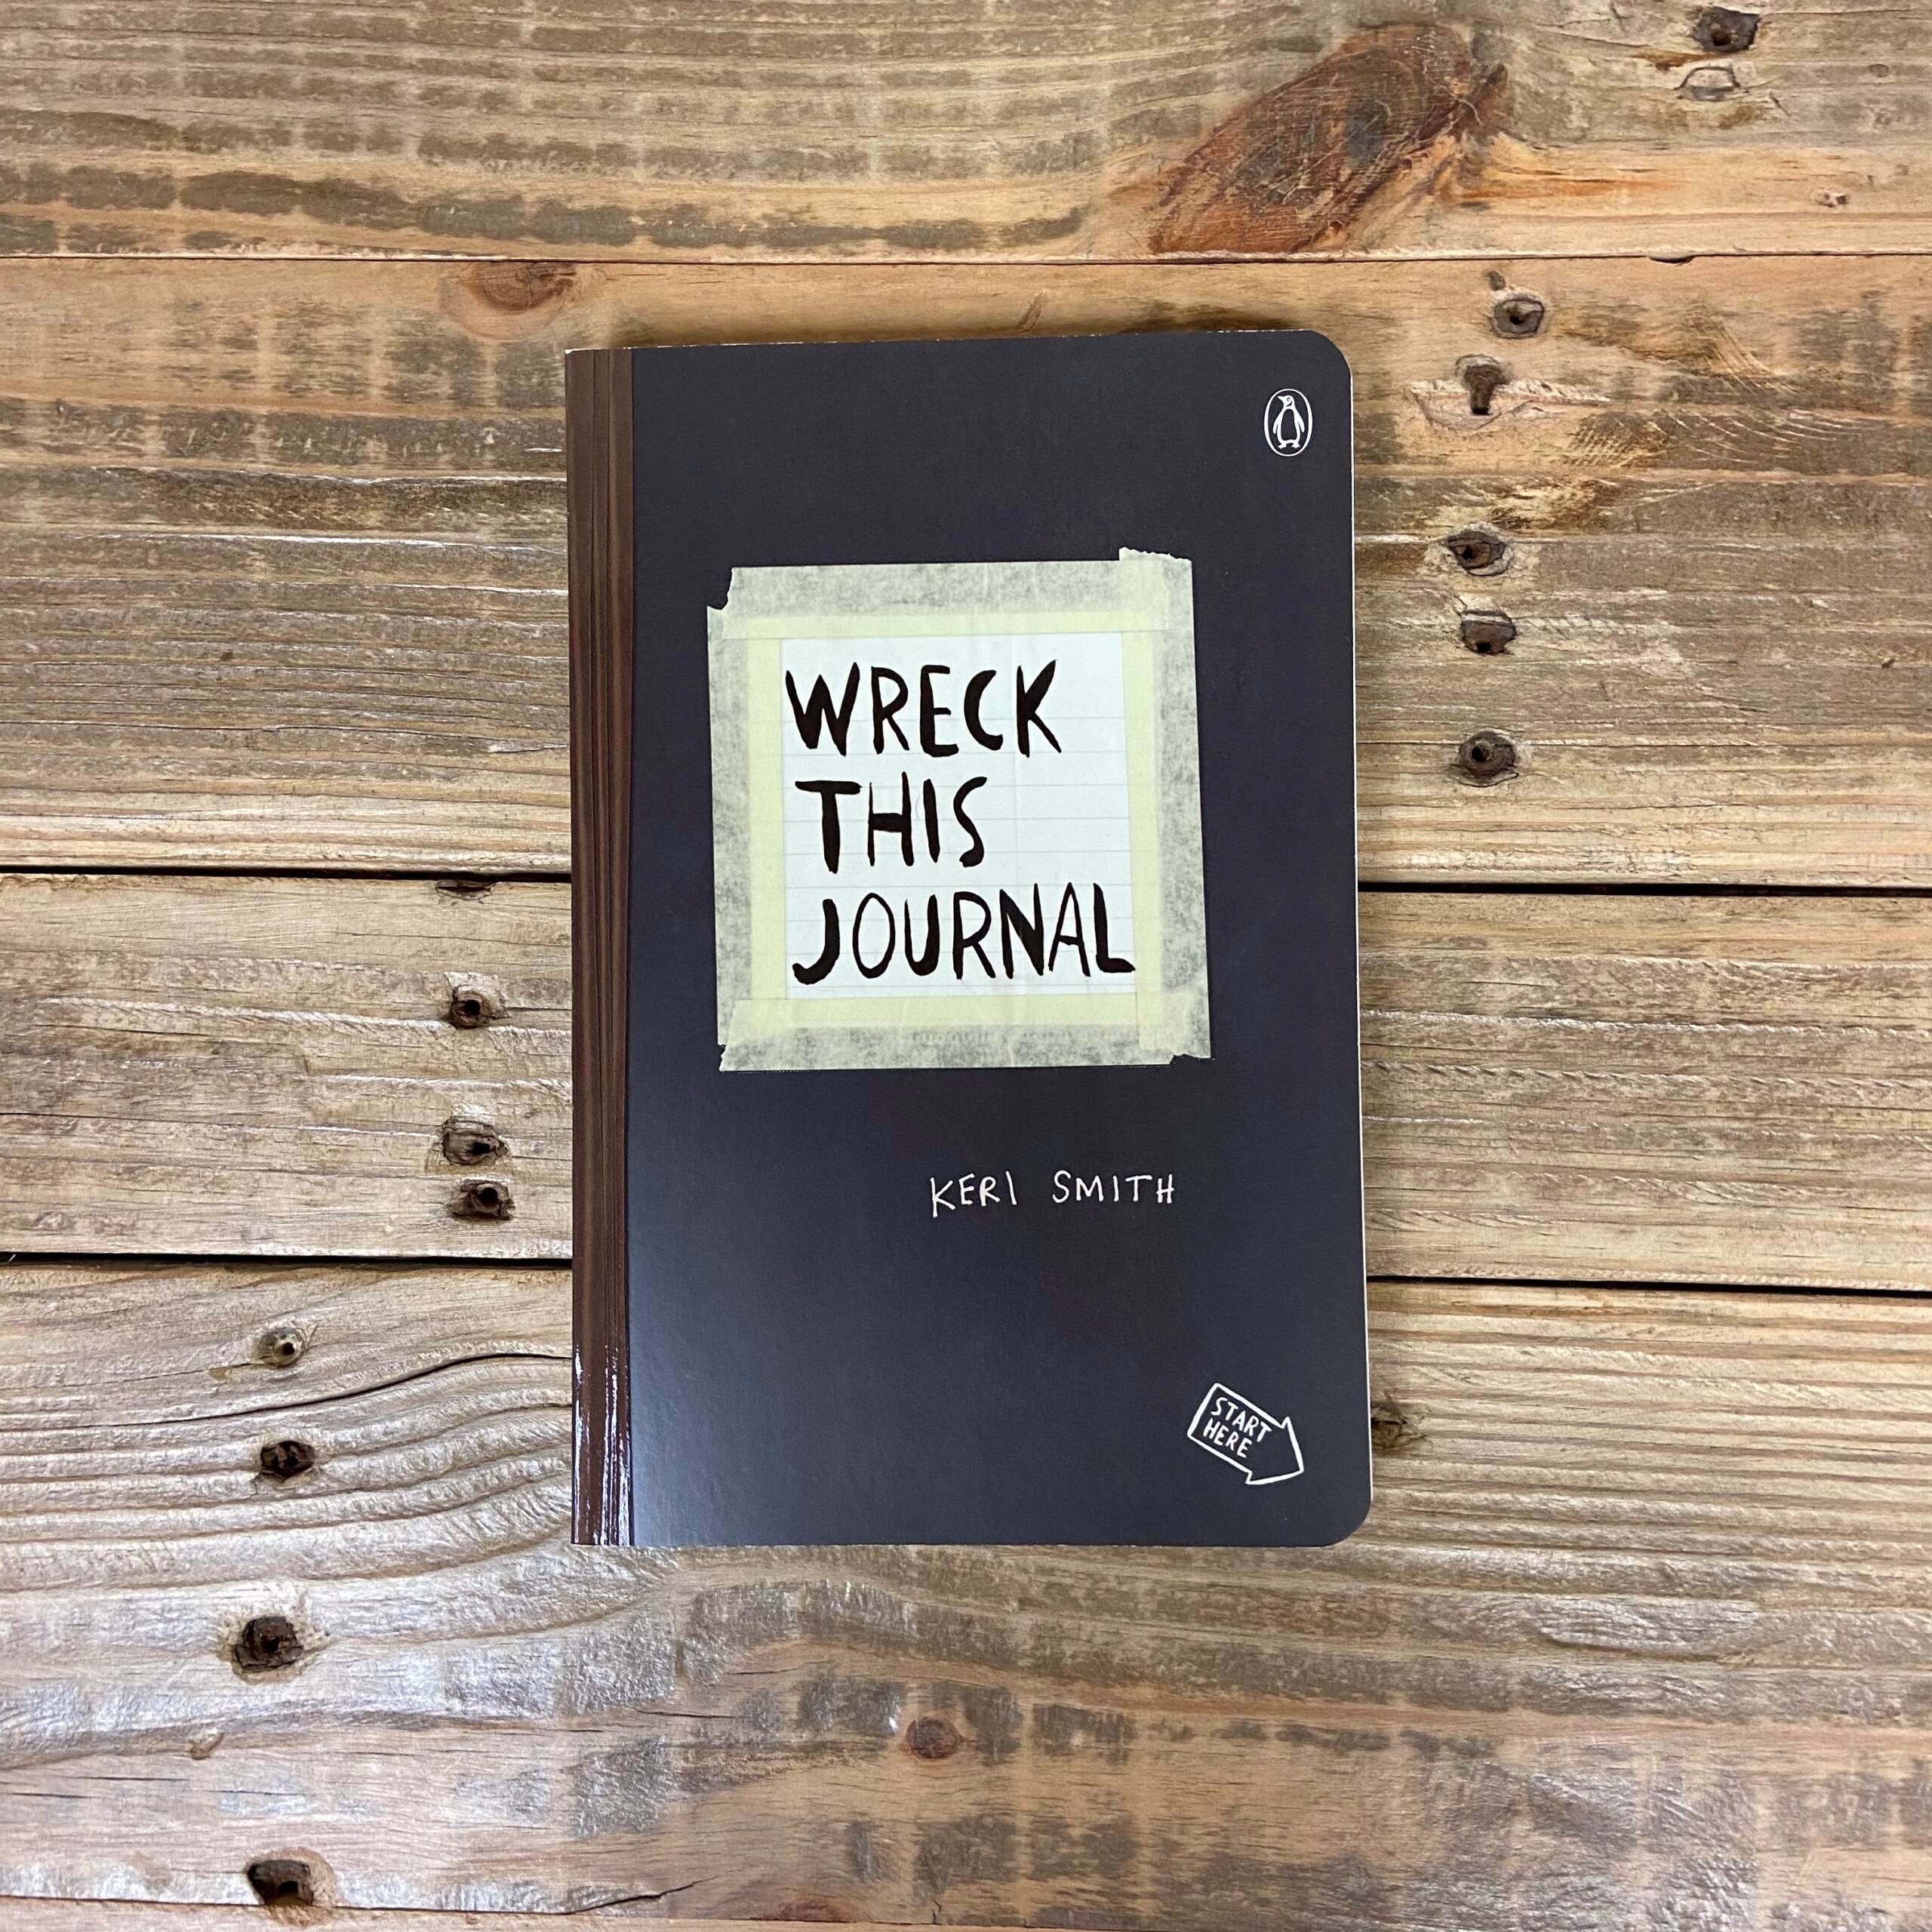 picture of the original Wreck this Journal by Keri Smith